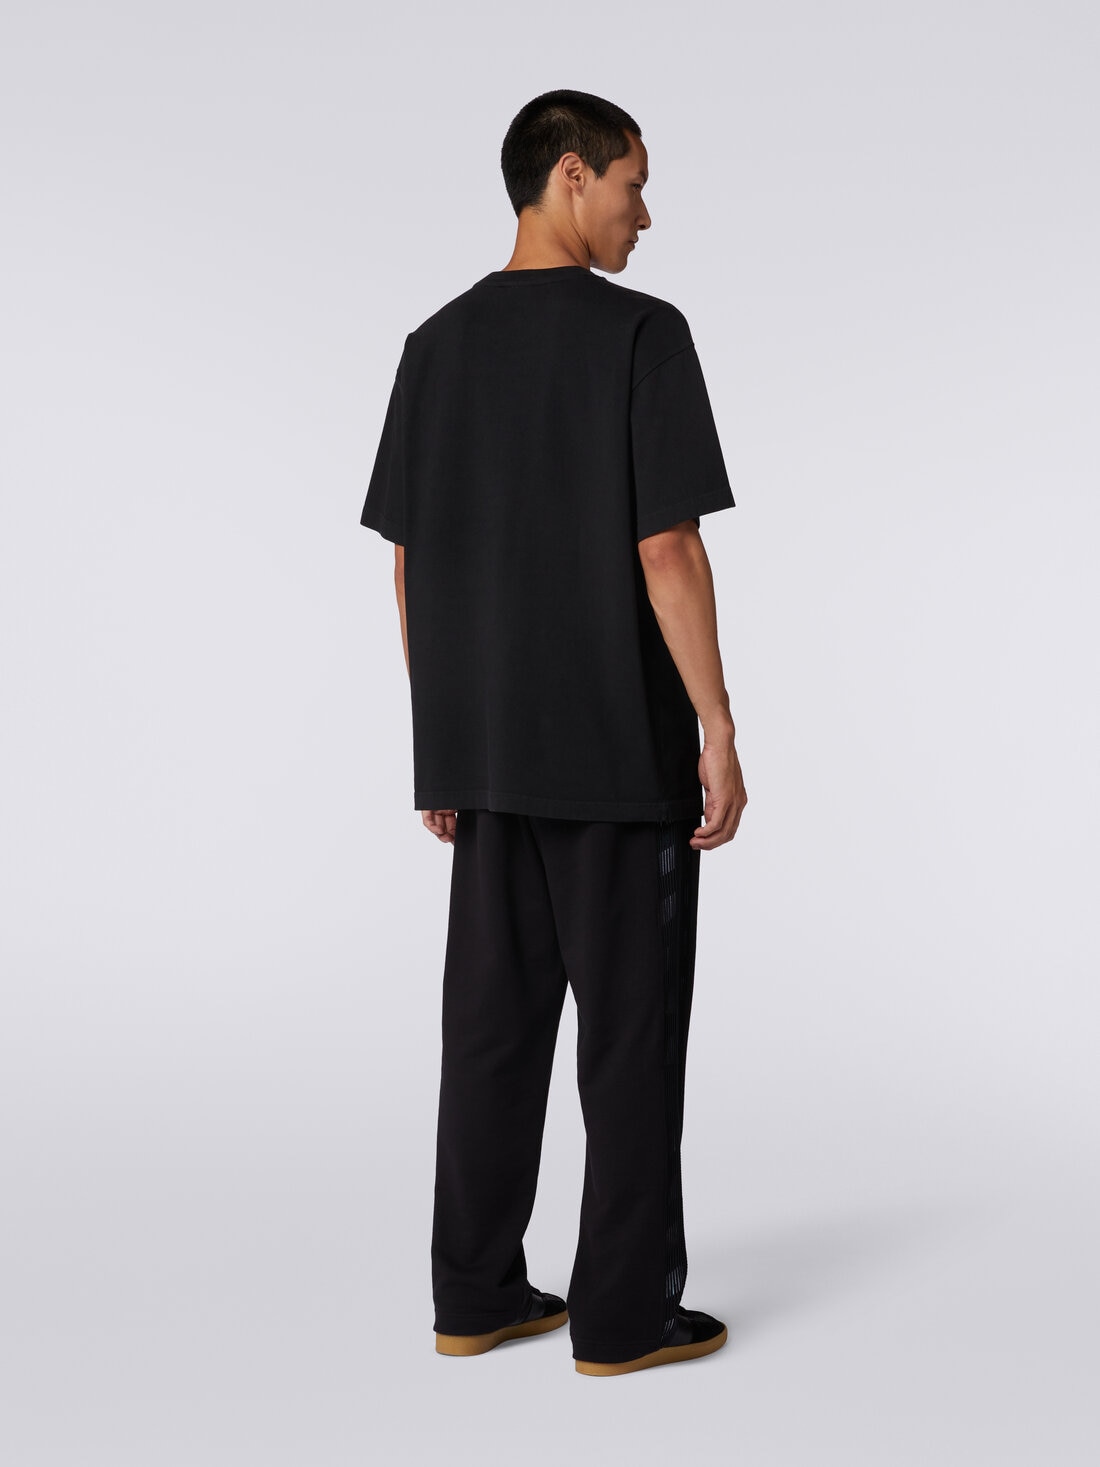 Trousers in fleece with logo and knitted side bands, Black    - TS24SI03BJ00INS91J4 - 3